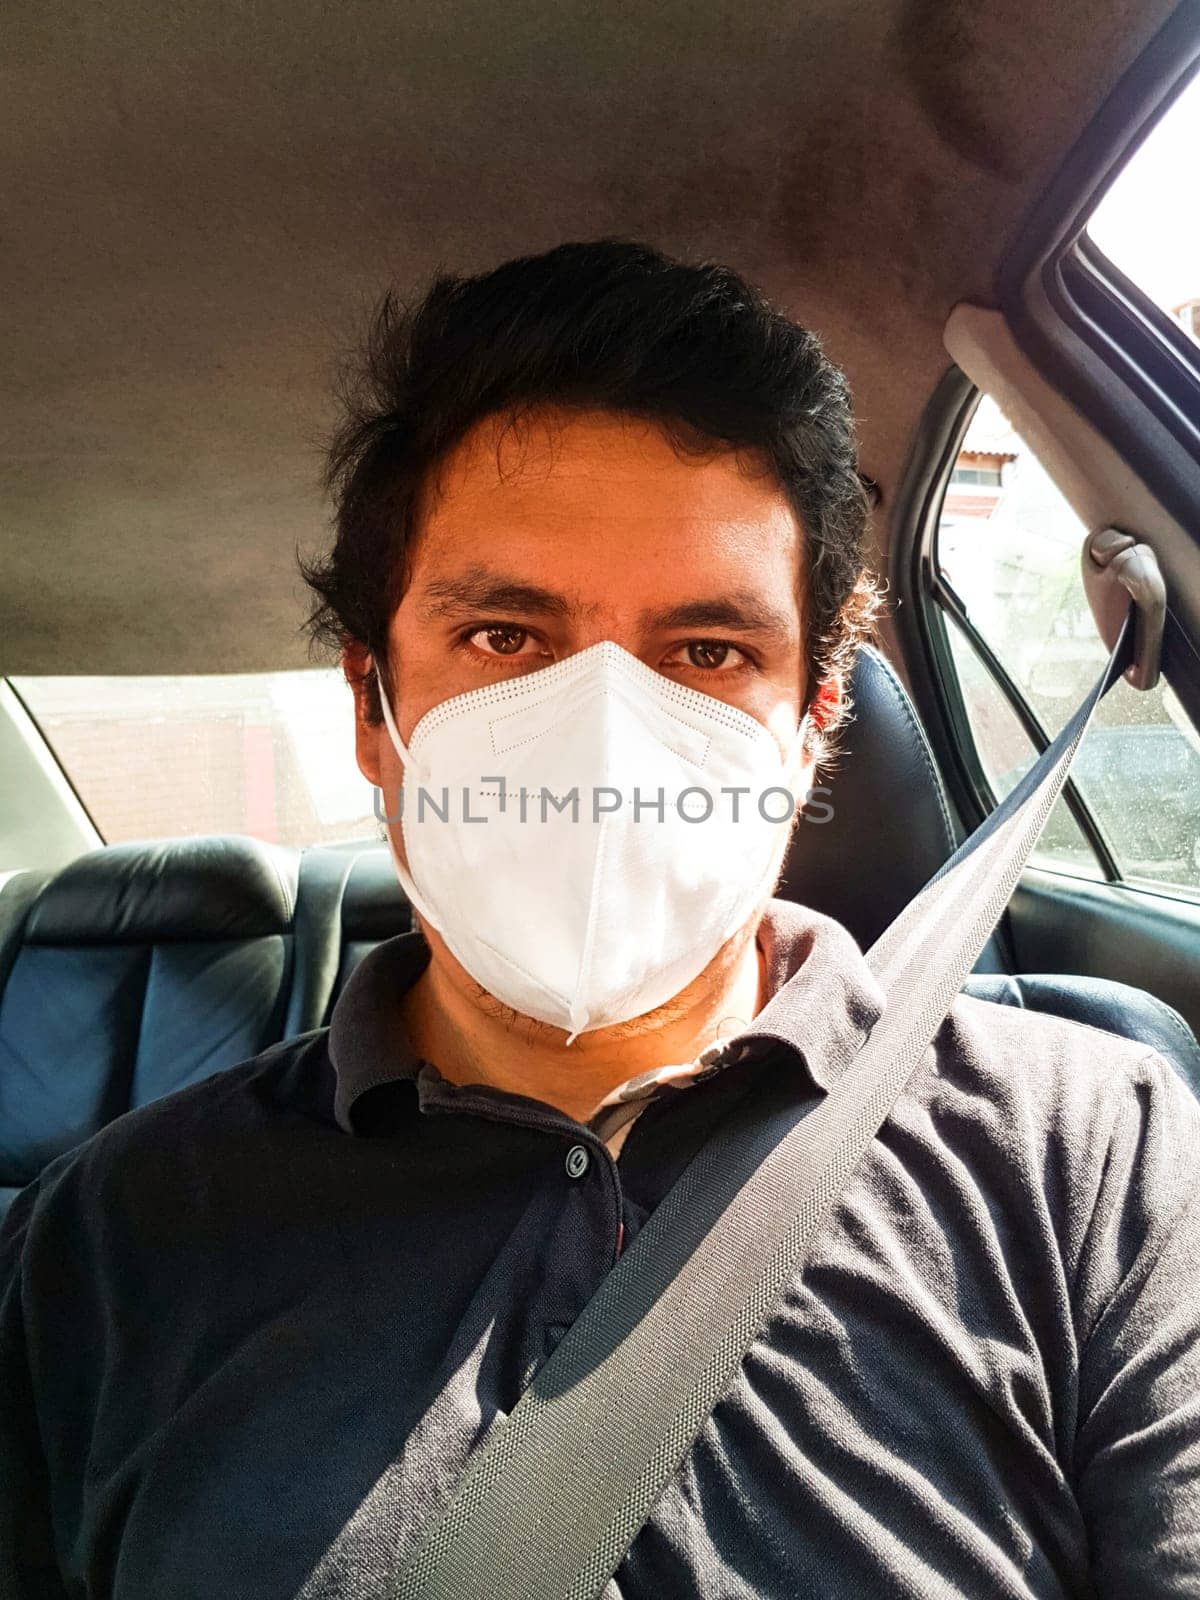 A man driving a car puts on a medical mask during an epidemic, a taxi driver in a mask, protection from the virus. Driver in black car